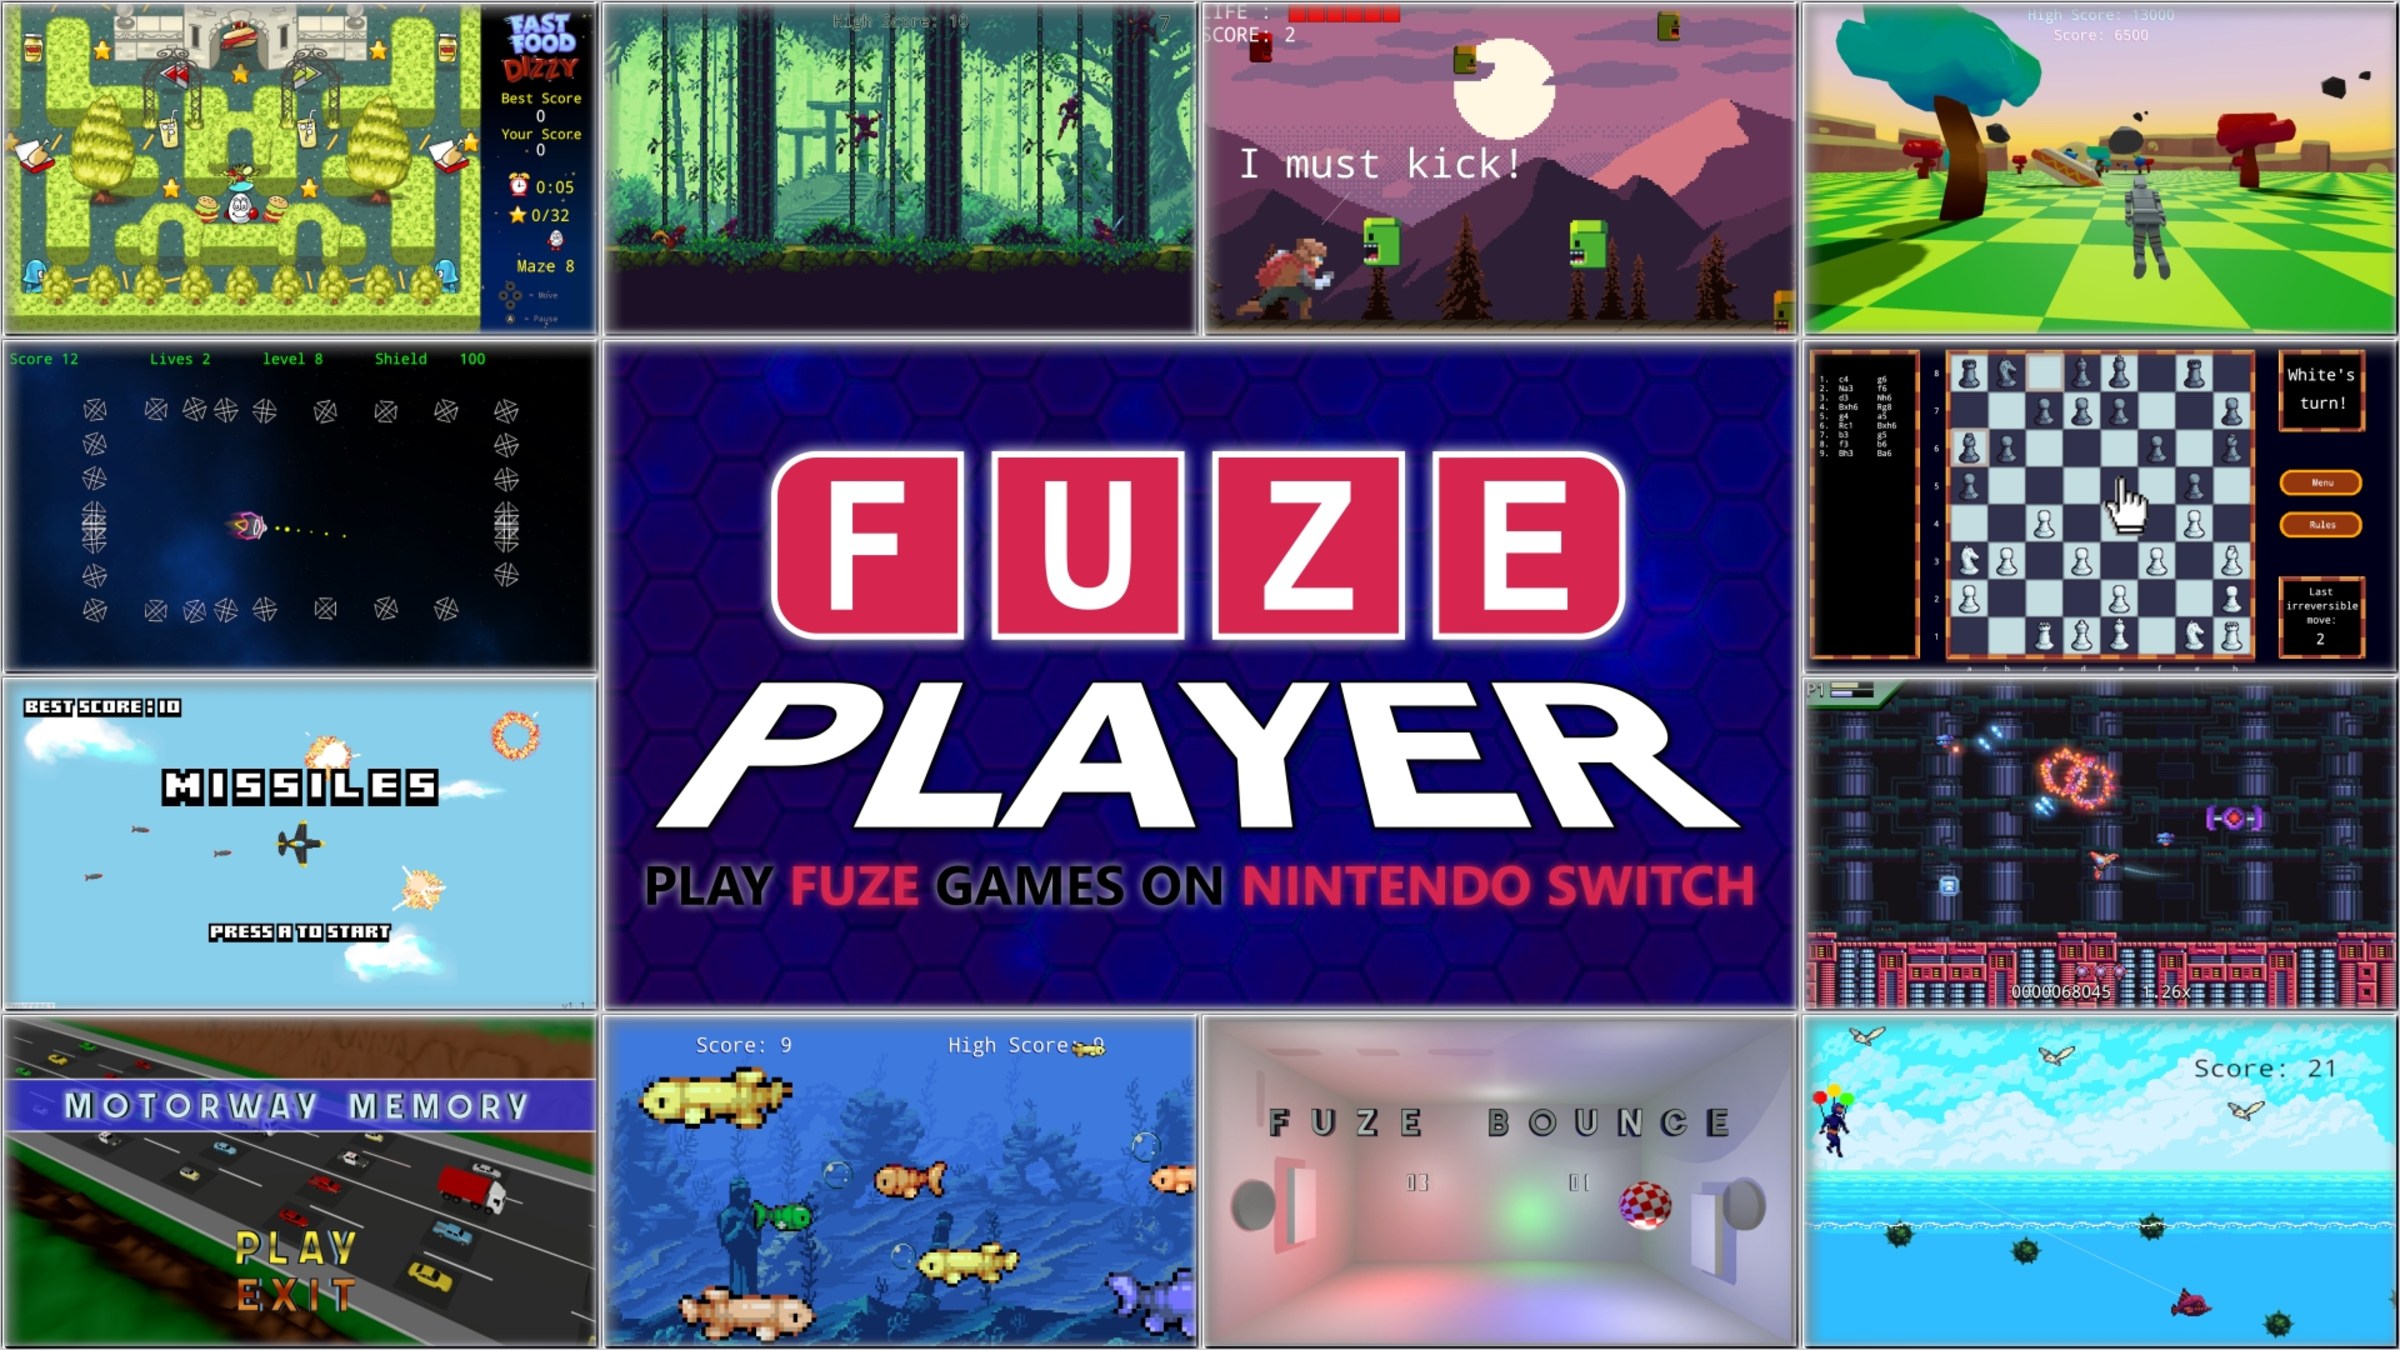 Fuser is free to play for Nintendo Switch online subscribers until July 5th  - RouteNote Blog